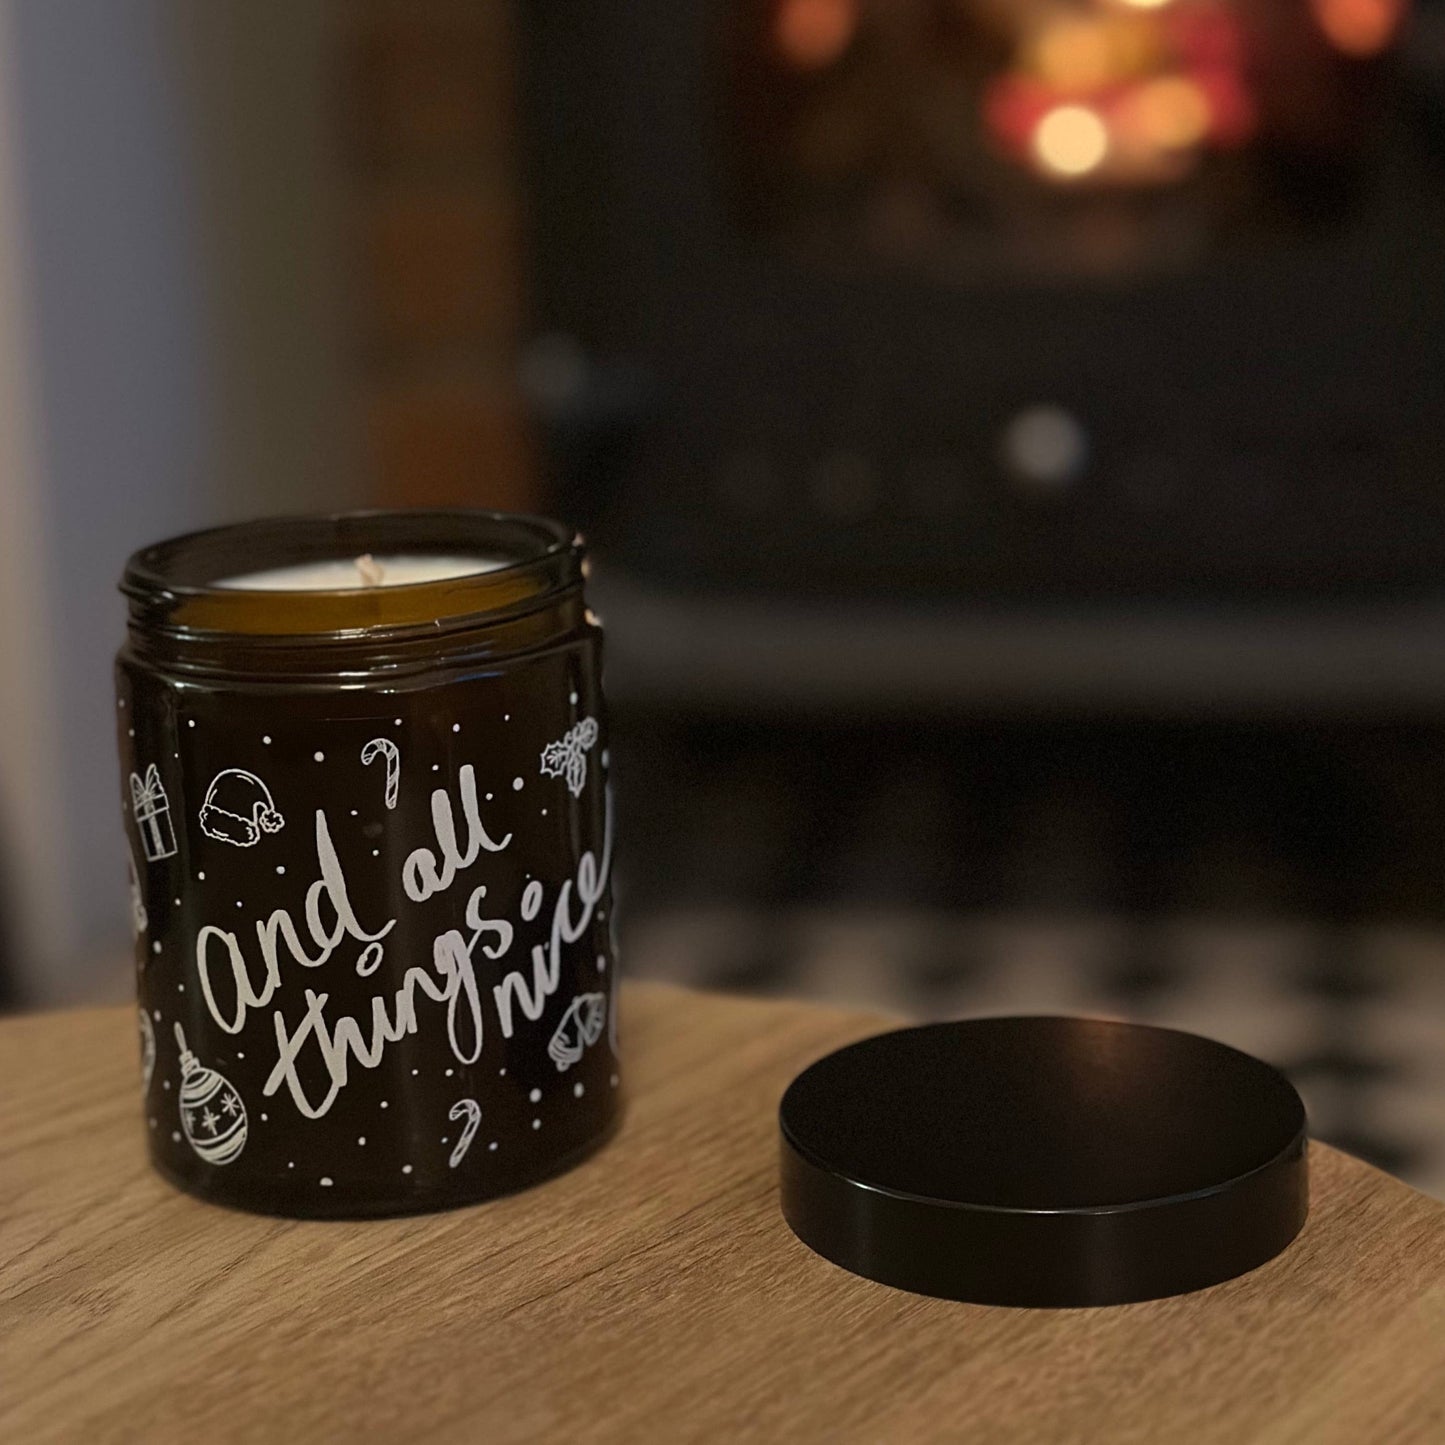 House of Two Trees "And All Things Nice' Candle